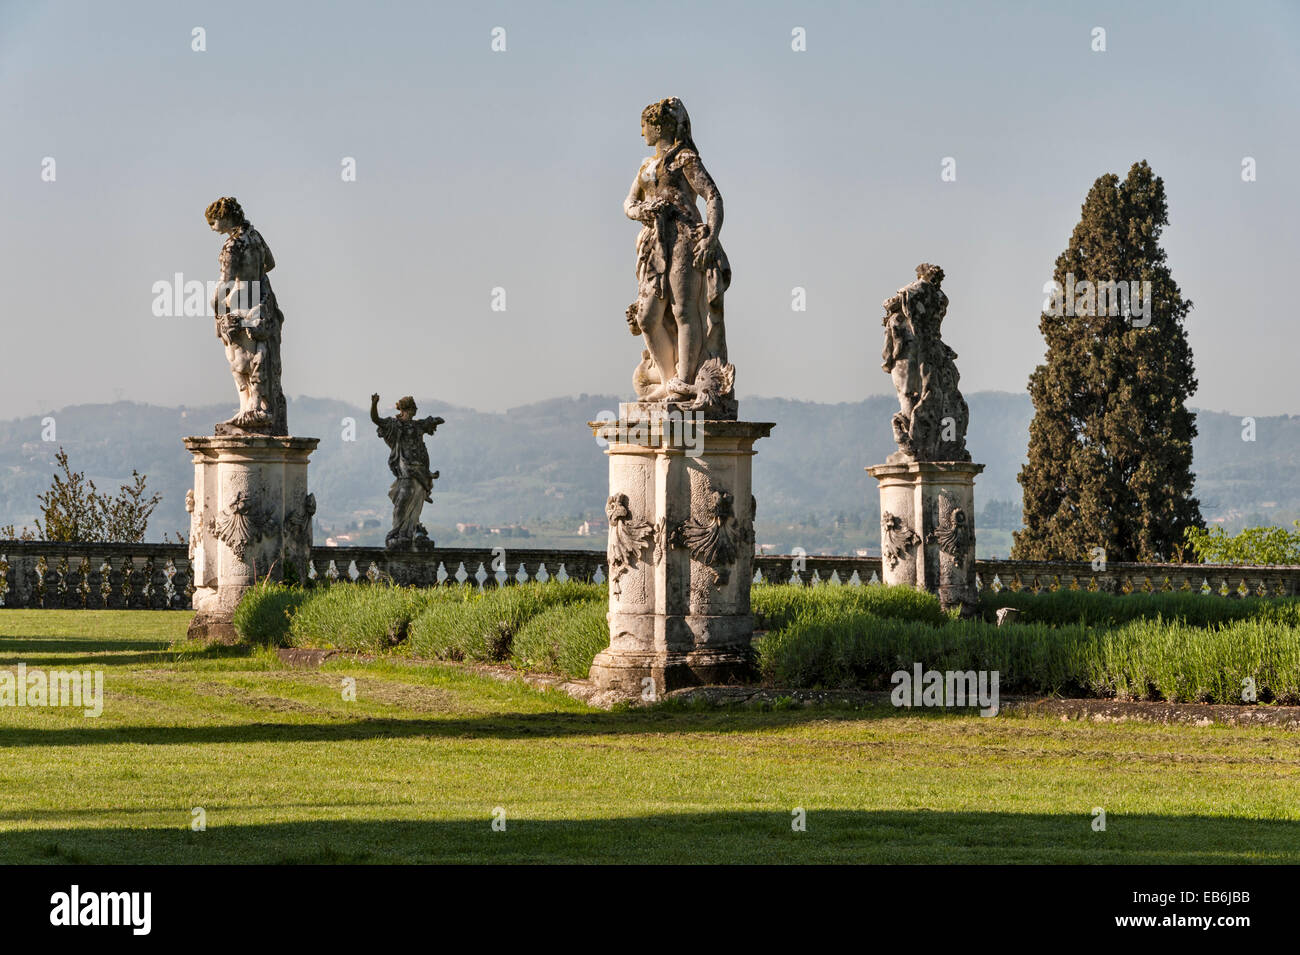 The romantic gardens of the early 18c Villa Trissino Marzotto, Vicenza, Italy. The lower garden is filled with statues by Orazio Marinali Stock Photo